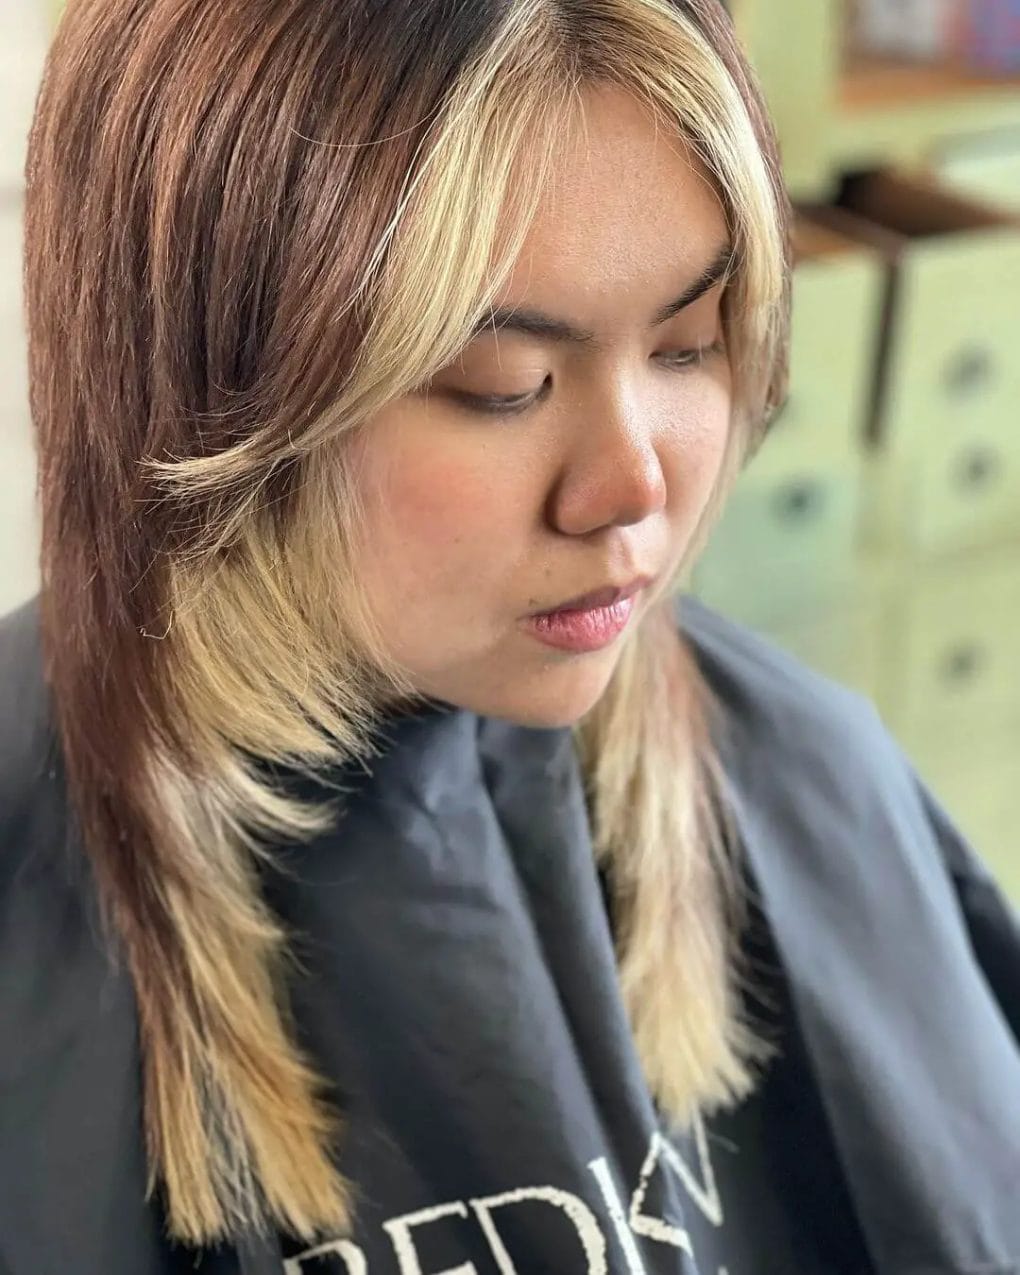 Soft layered jellyfish hairstyle transitioning from warm brown to sandy blonde ombre with a side part and slight curl.